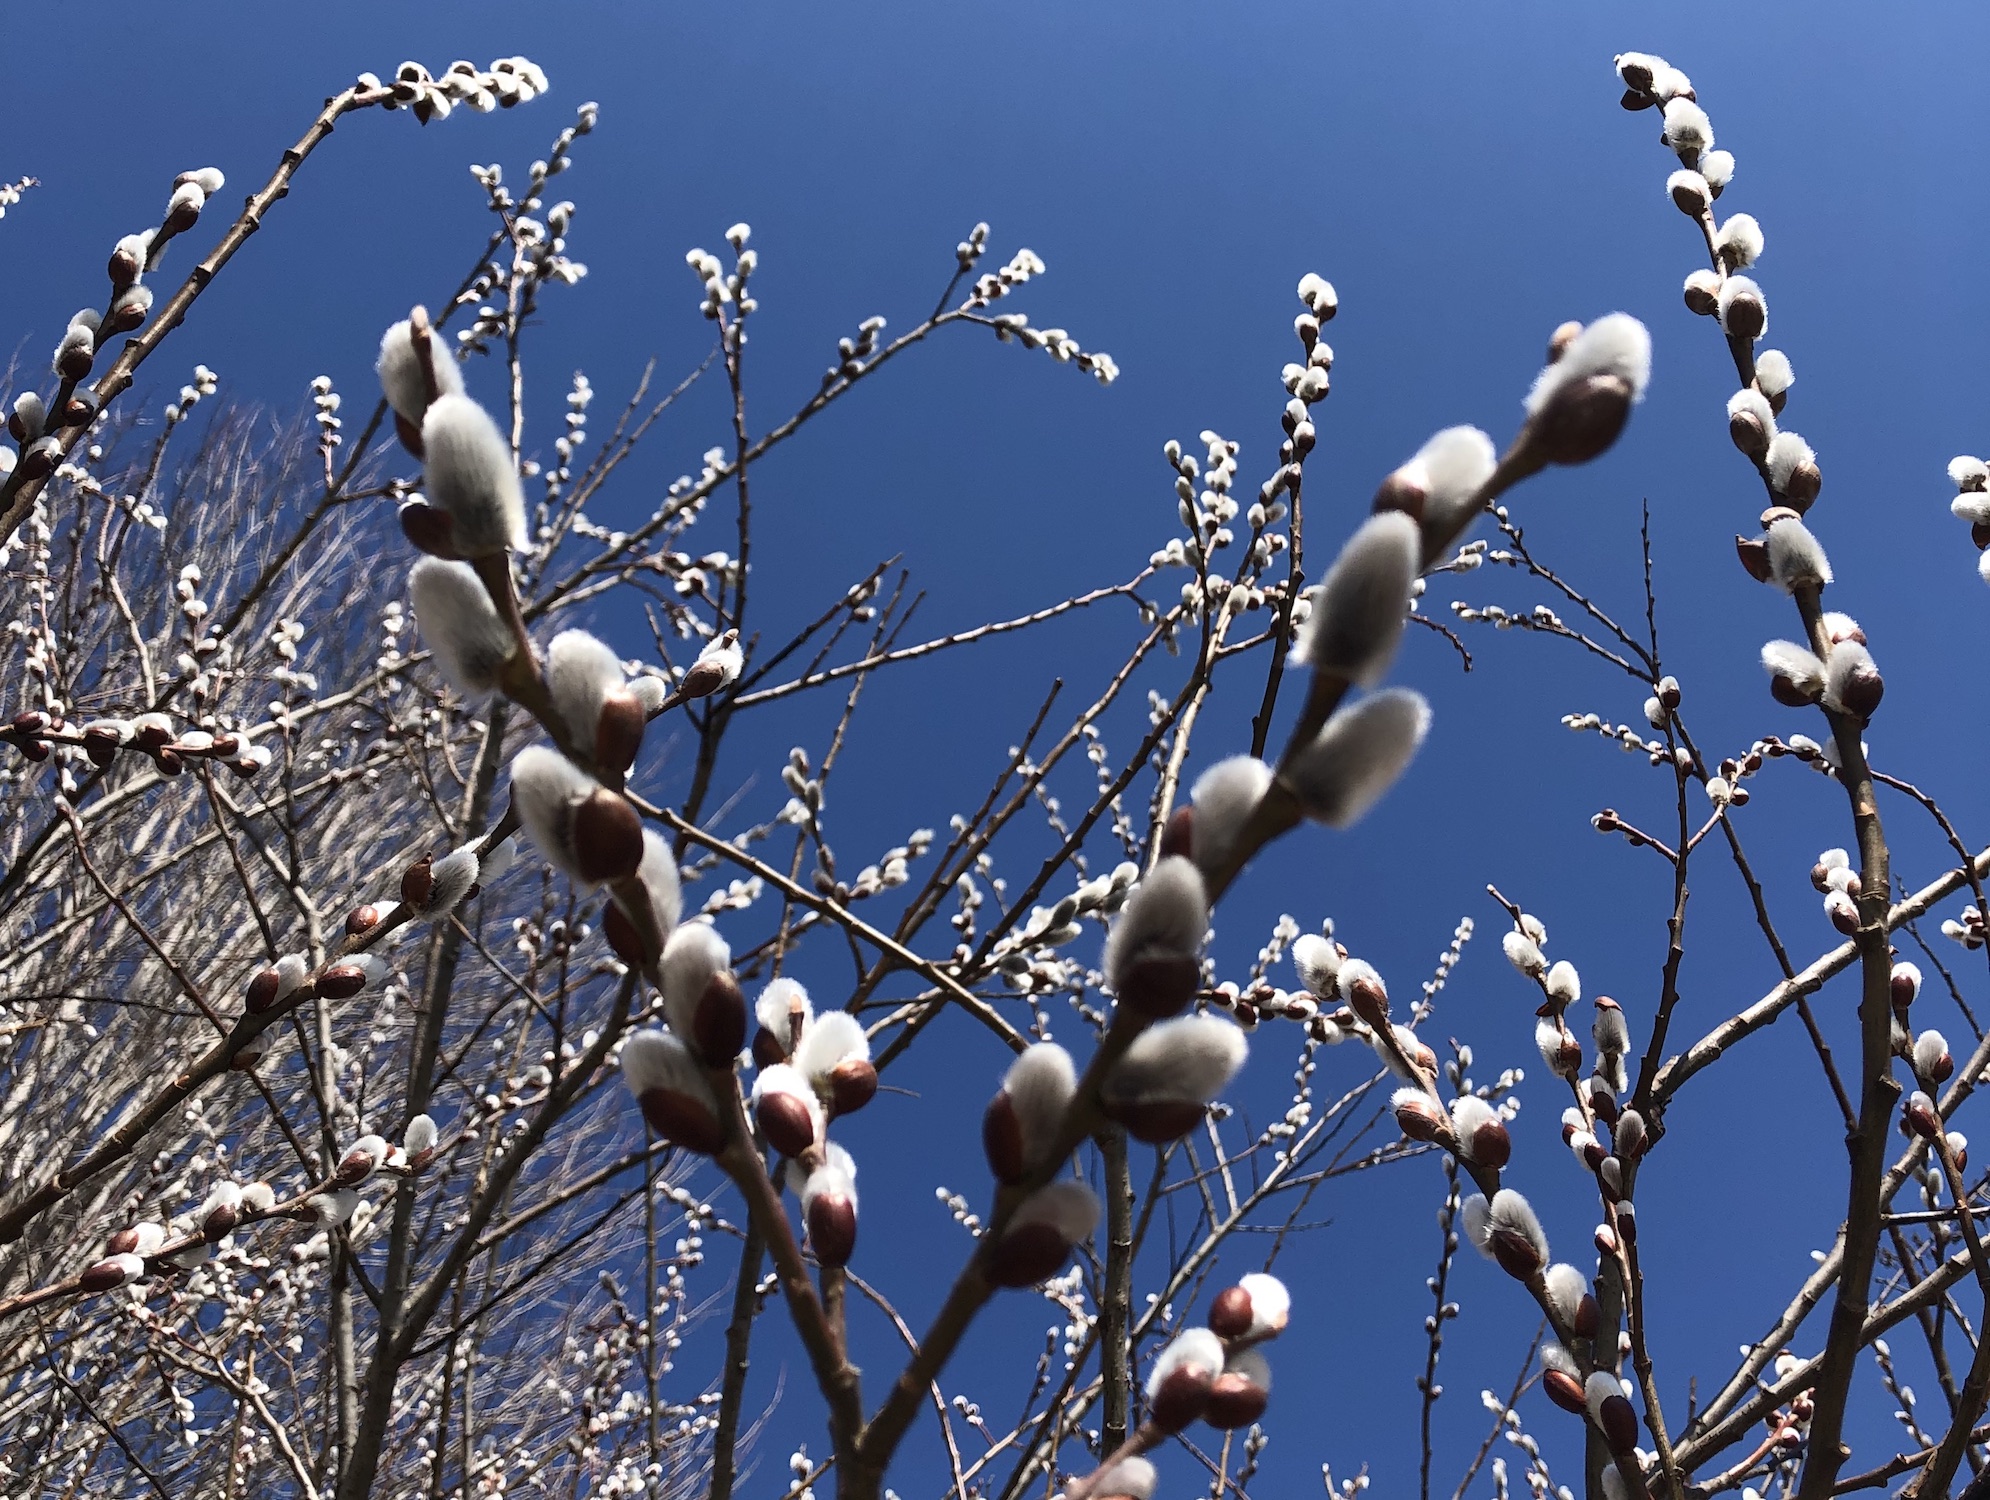 Pussy Willow in Longenecker Gardens at the University of Wisconsin Arboretum on March 17, 2019.